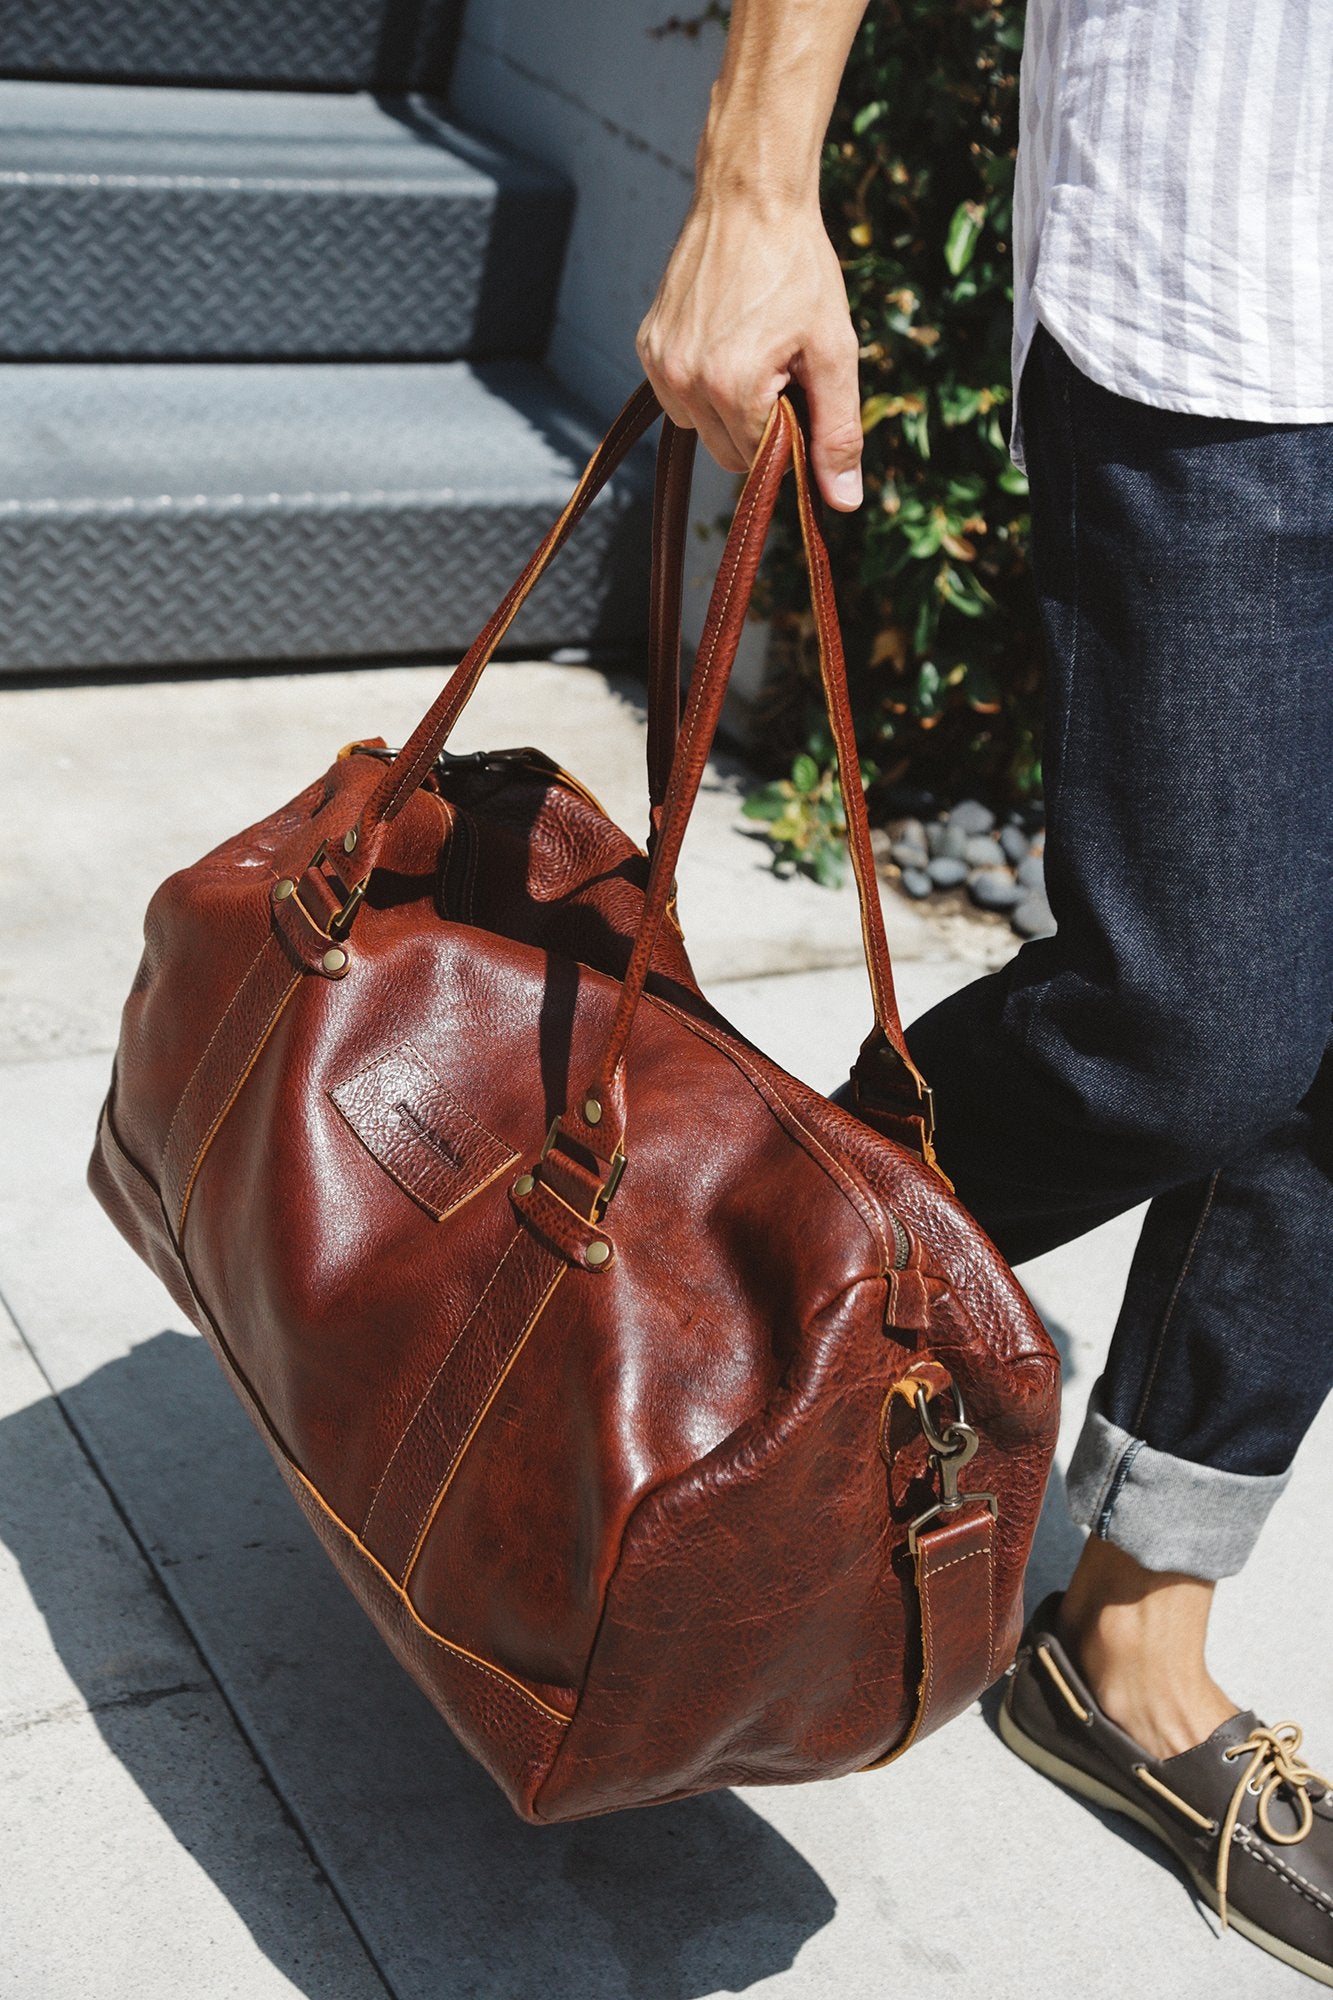 Leather Weekend Bag Brown Portsmouth